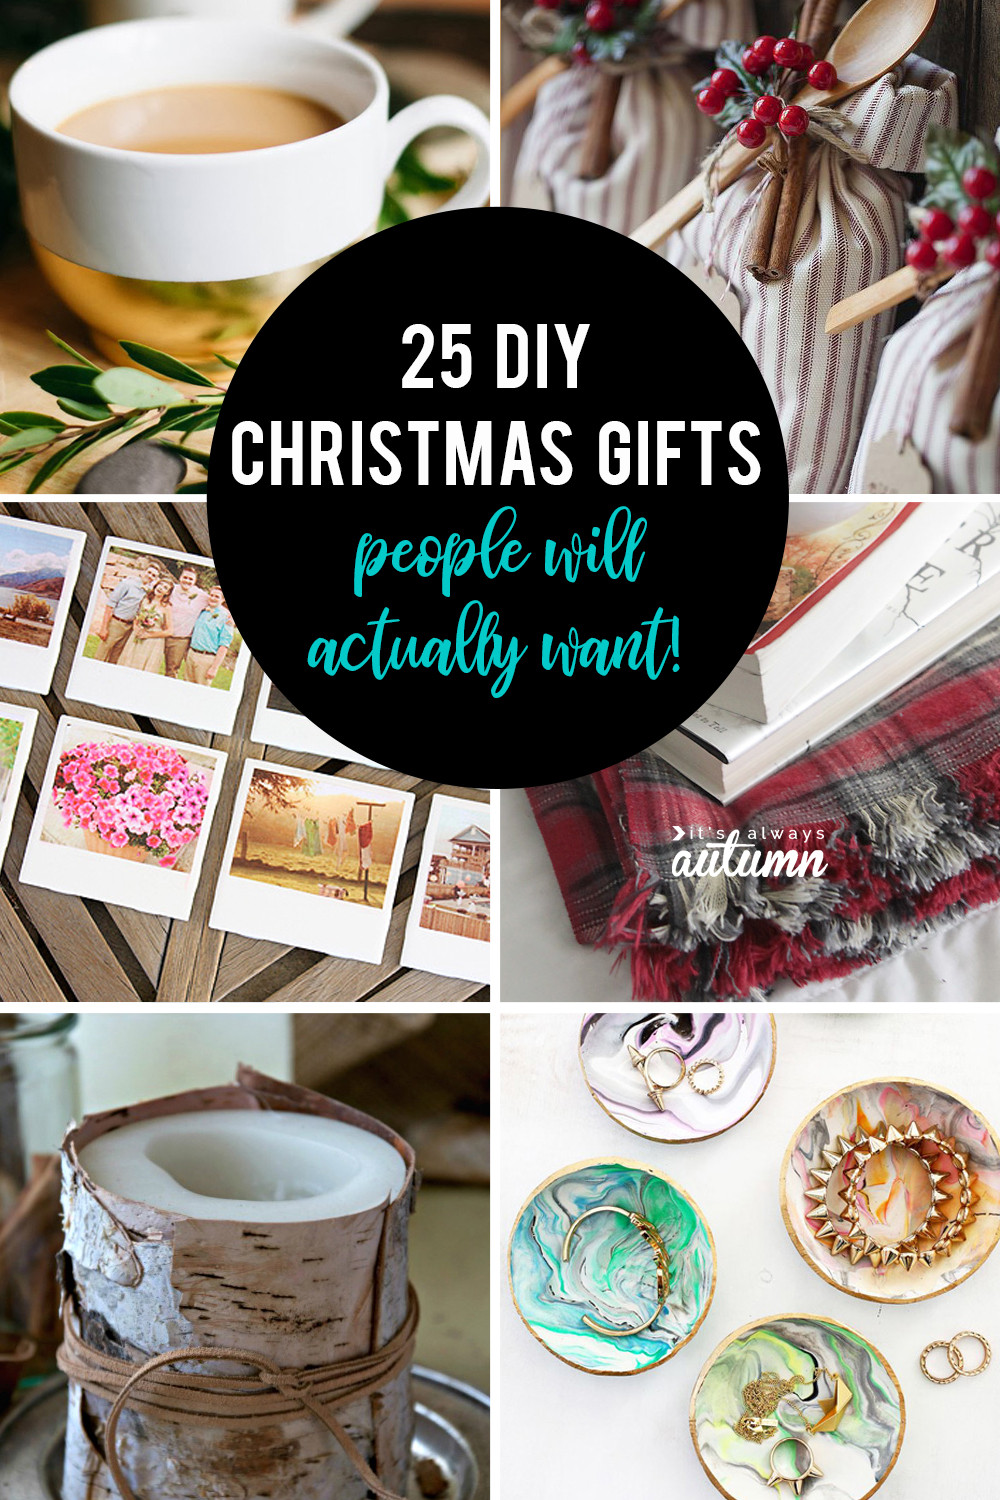 DIY Homemade Gifts
 25 amazing DIY ts people will actually want It s